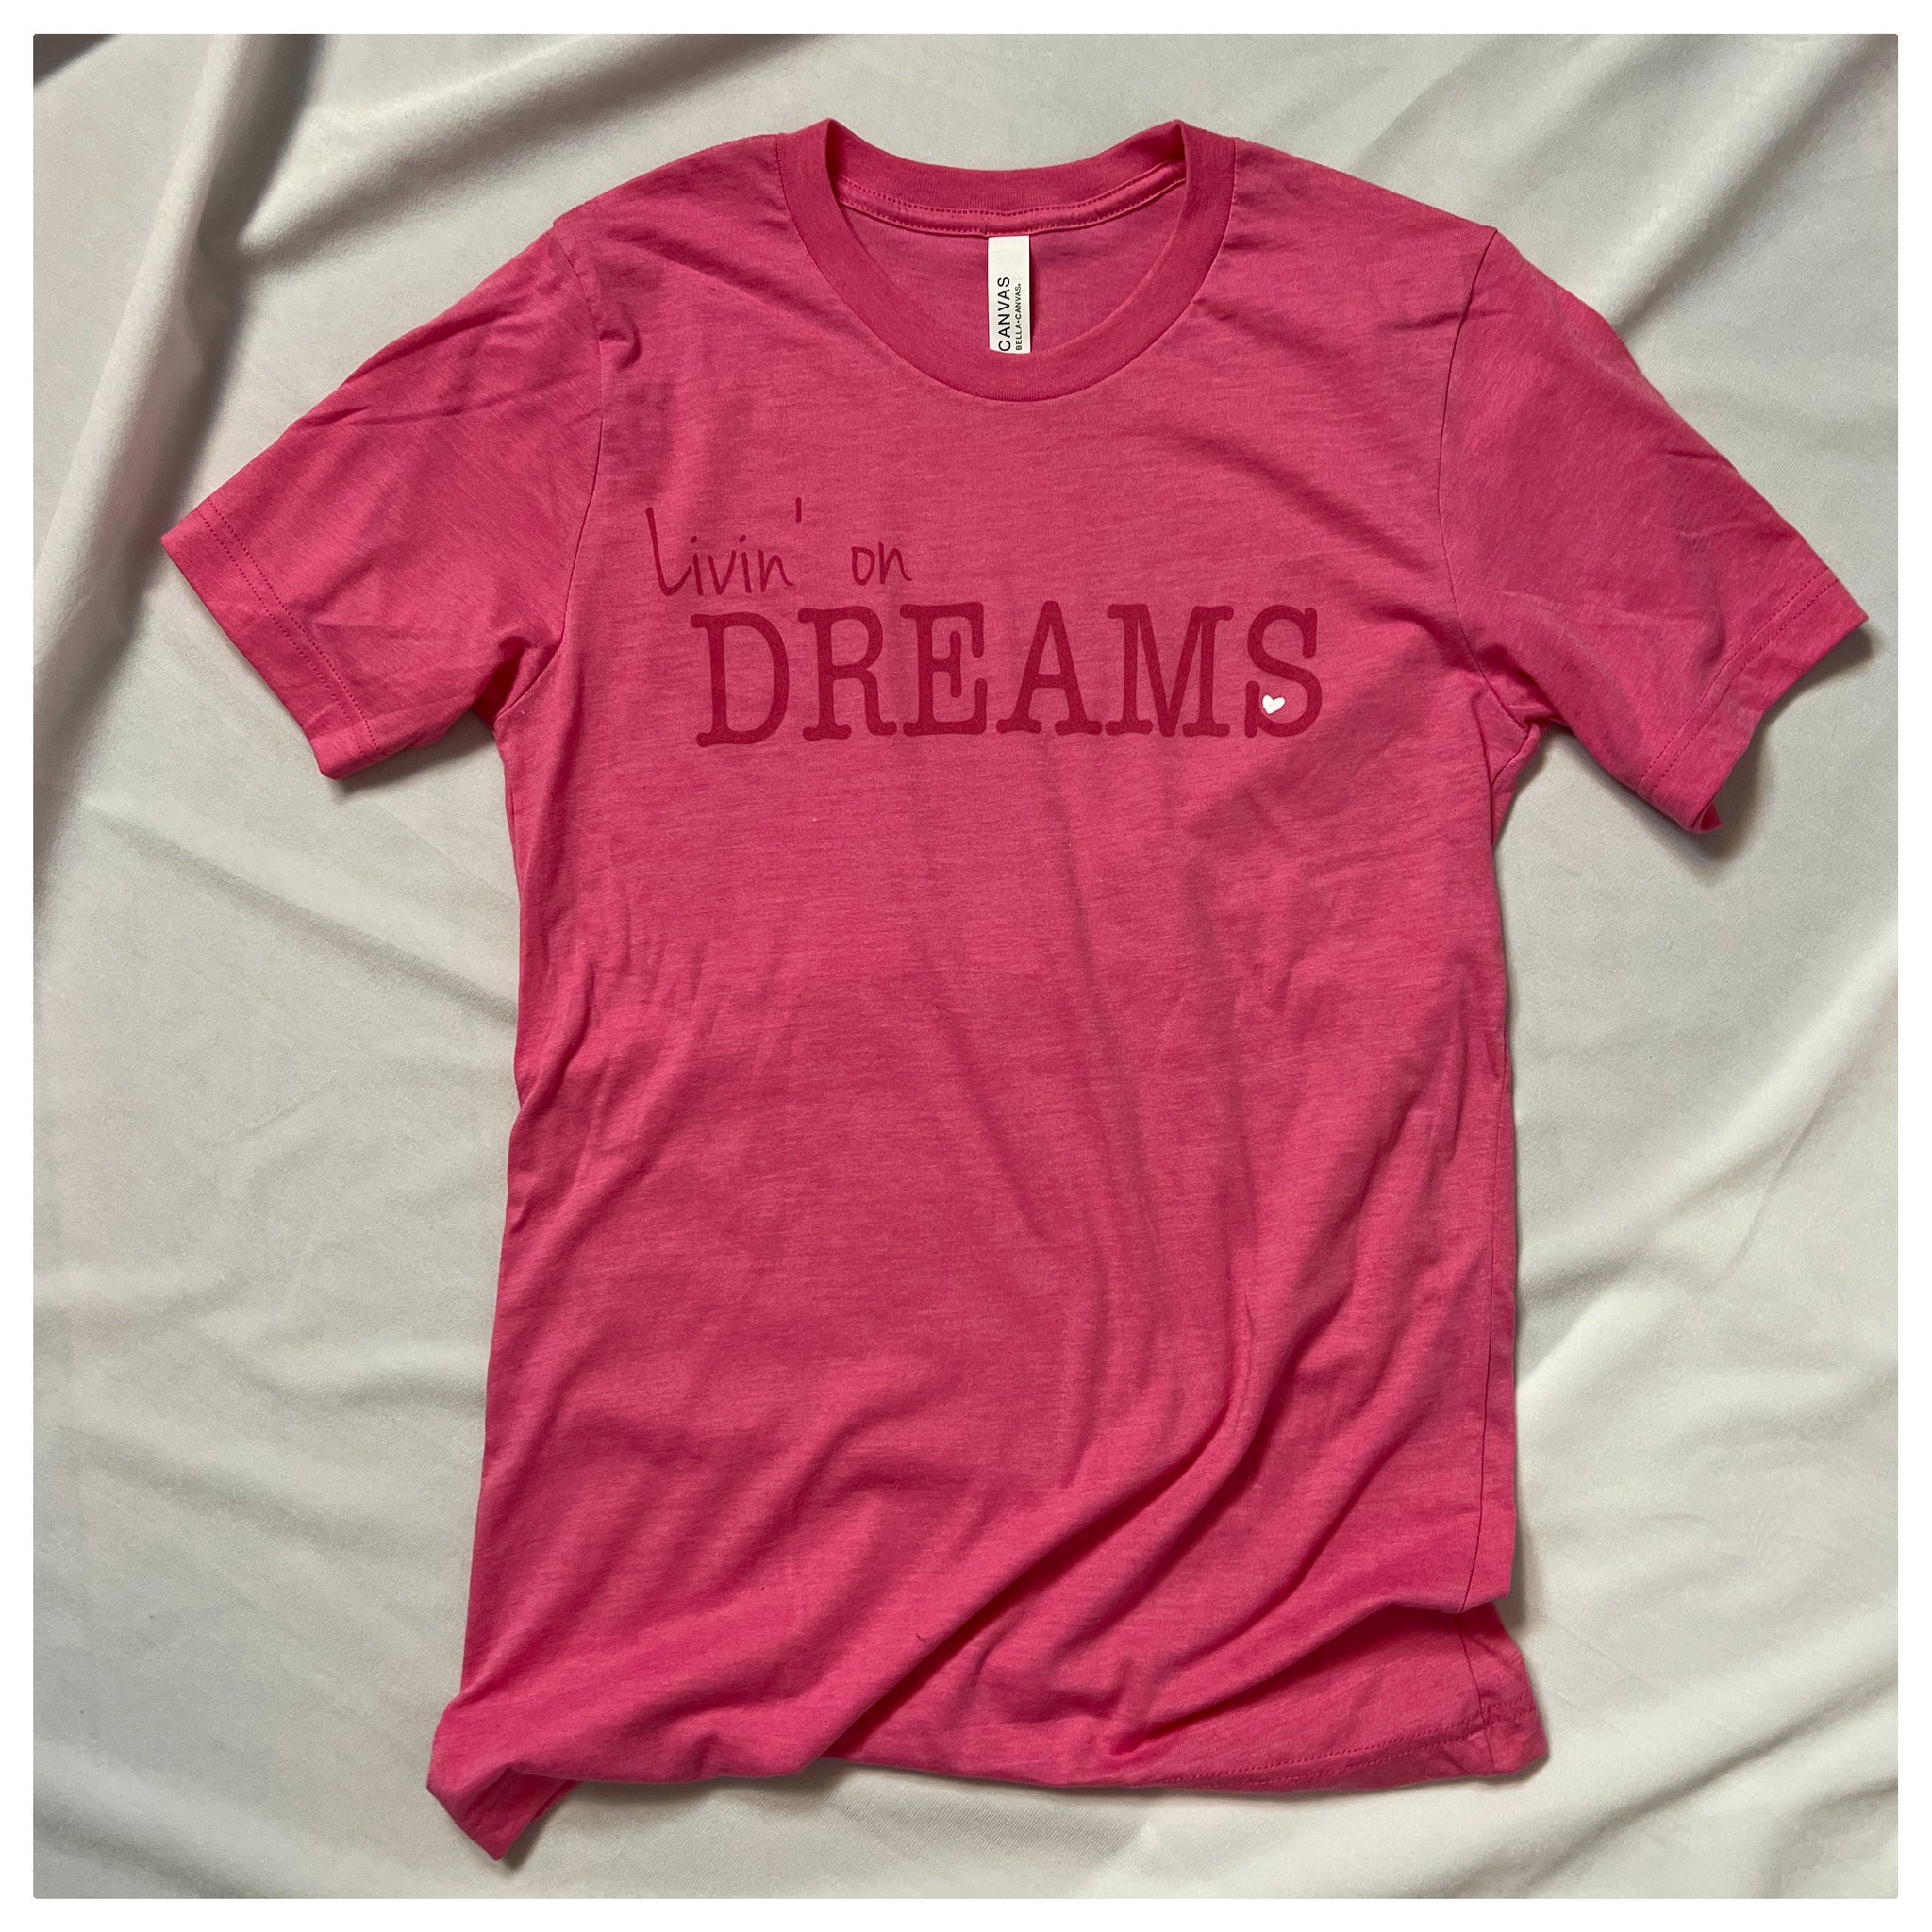 Pink Adult Livin' on DREAMS T-shirt